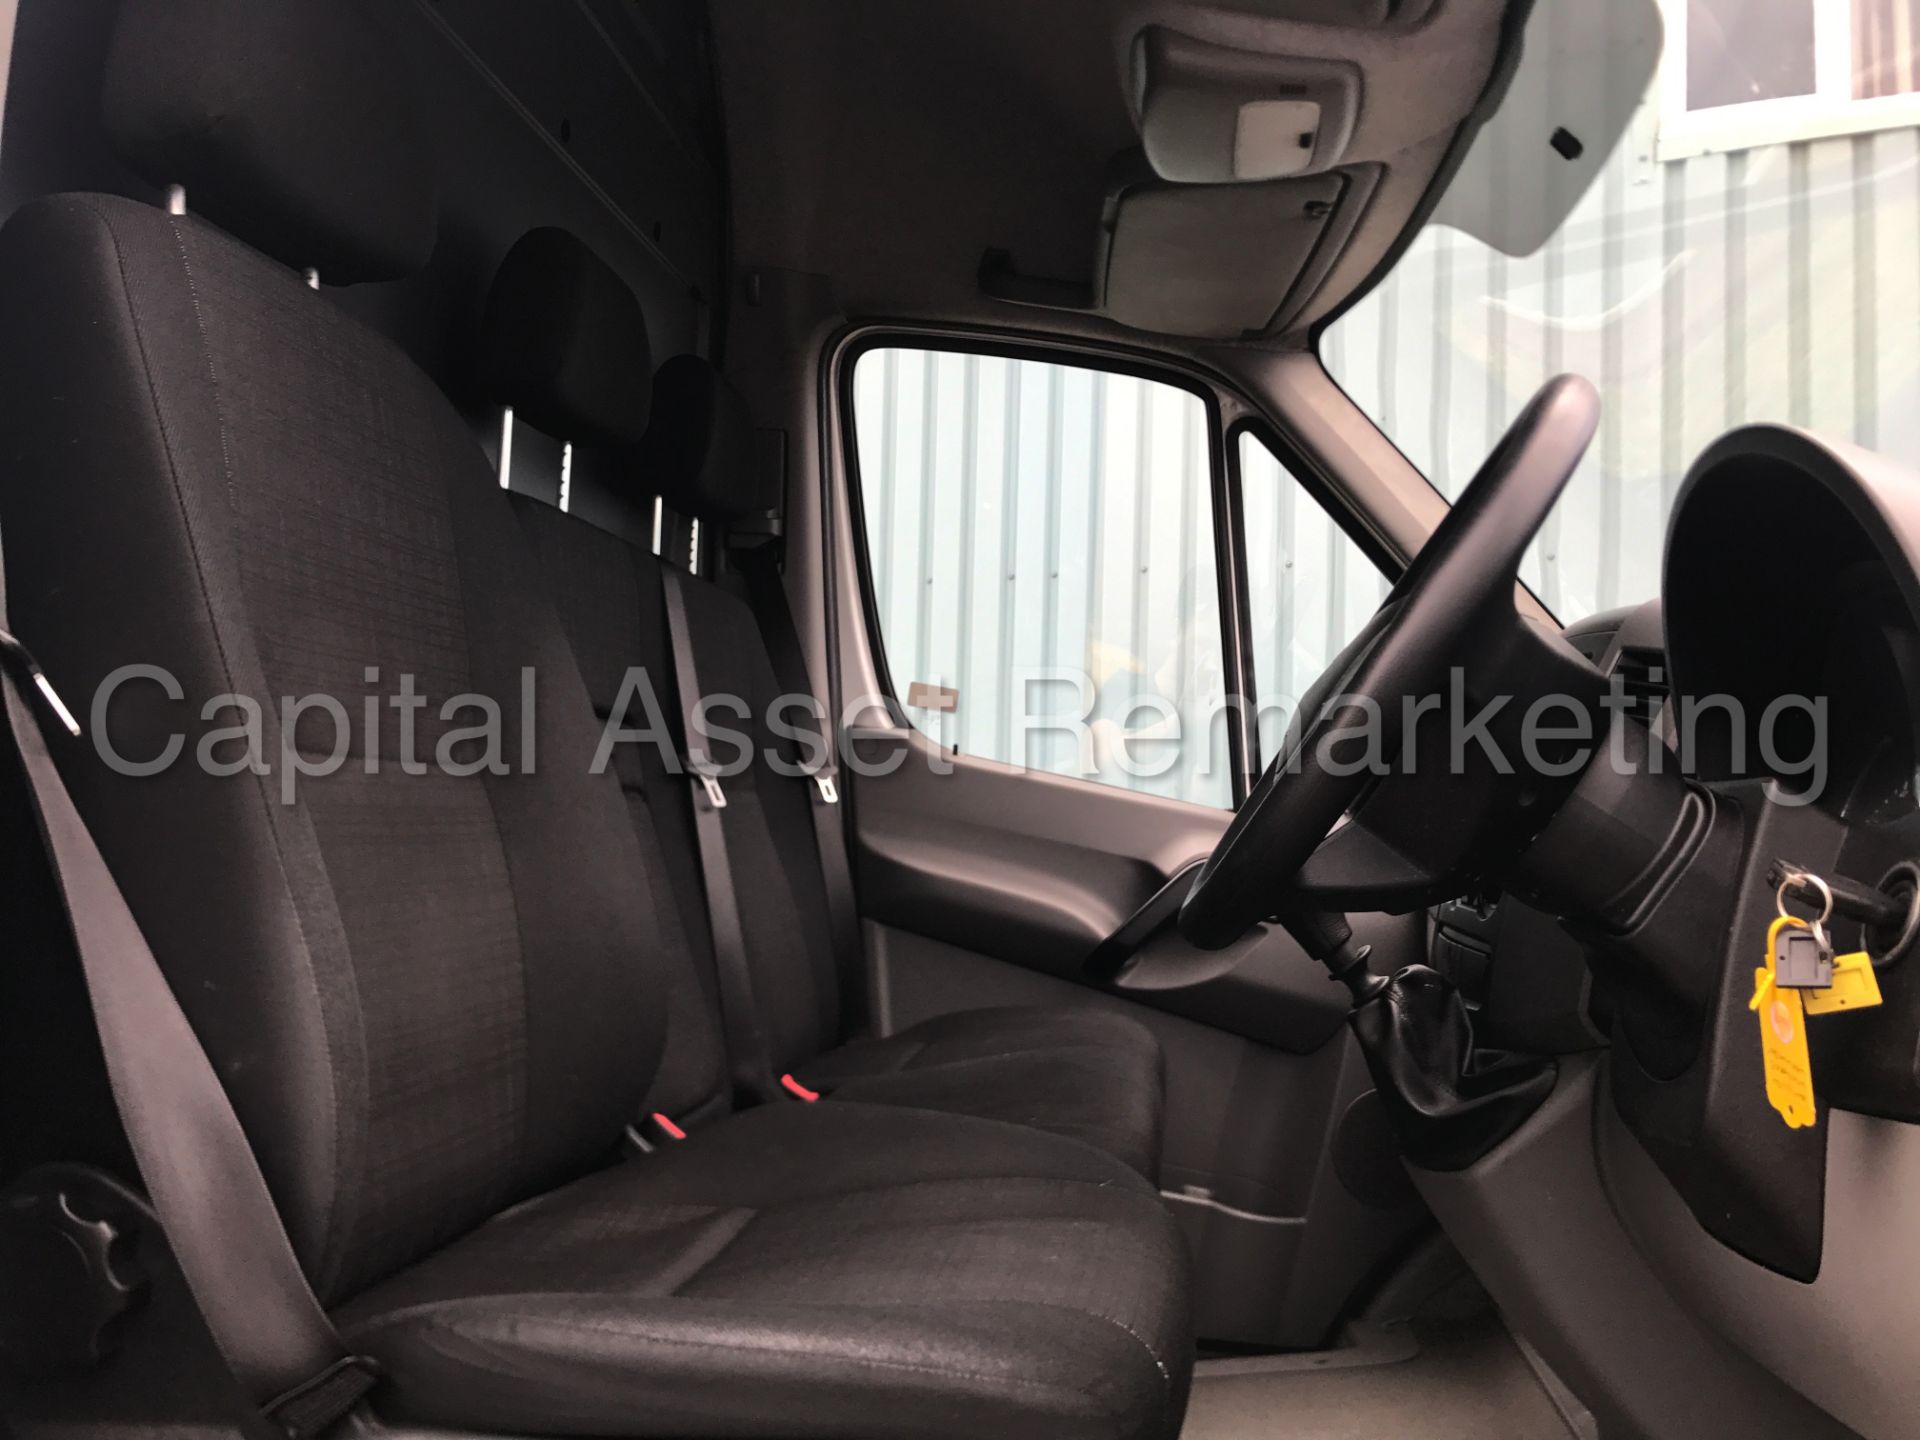 MERCEDES-BENZ SPRINTER 313 CDI 'MWB HI-ROOF' (2014) '130 BHP - 6 SPEED' (1 COMPANY OWNER FROM NEW) - Image 16 of 22